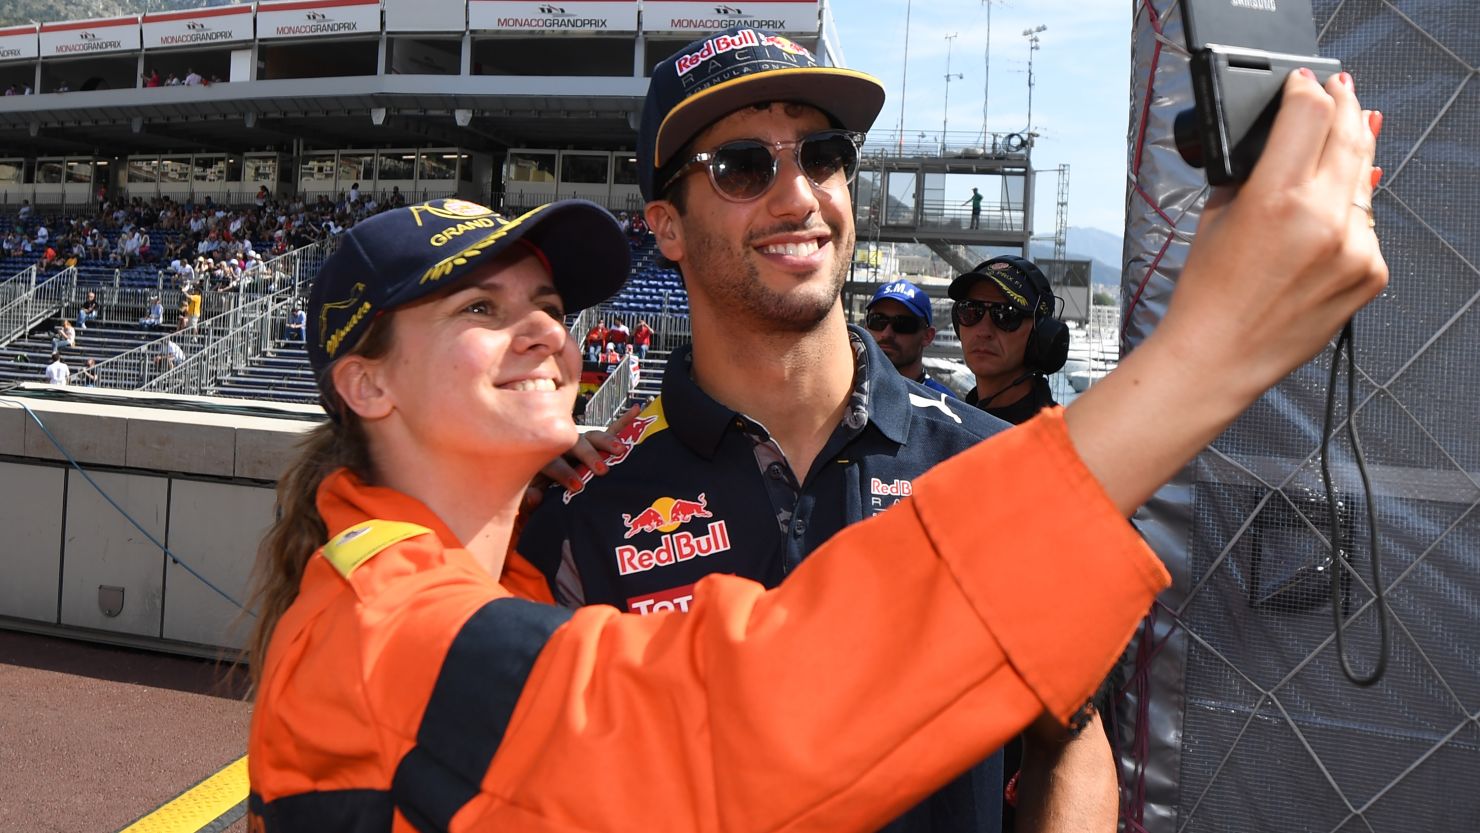 Ricciardo stops to pose for a selfie with steward after claiming pole position in Monaco.